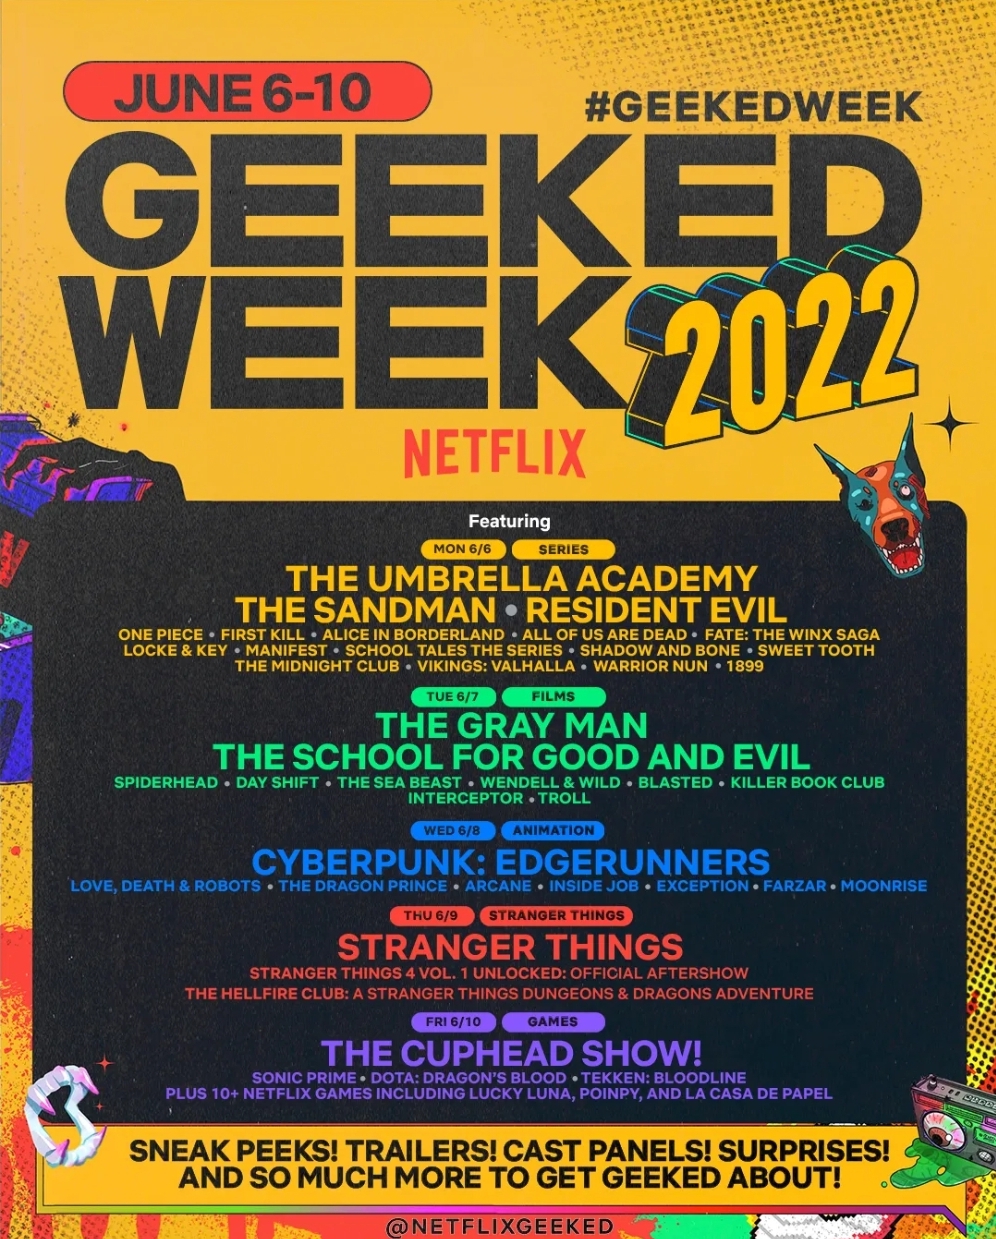 Netflix Geeked Week: Day 2 – ‘The Gray Man’, ‘Spiderhead’ And More